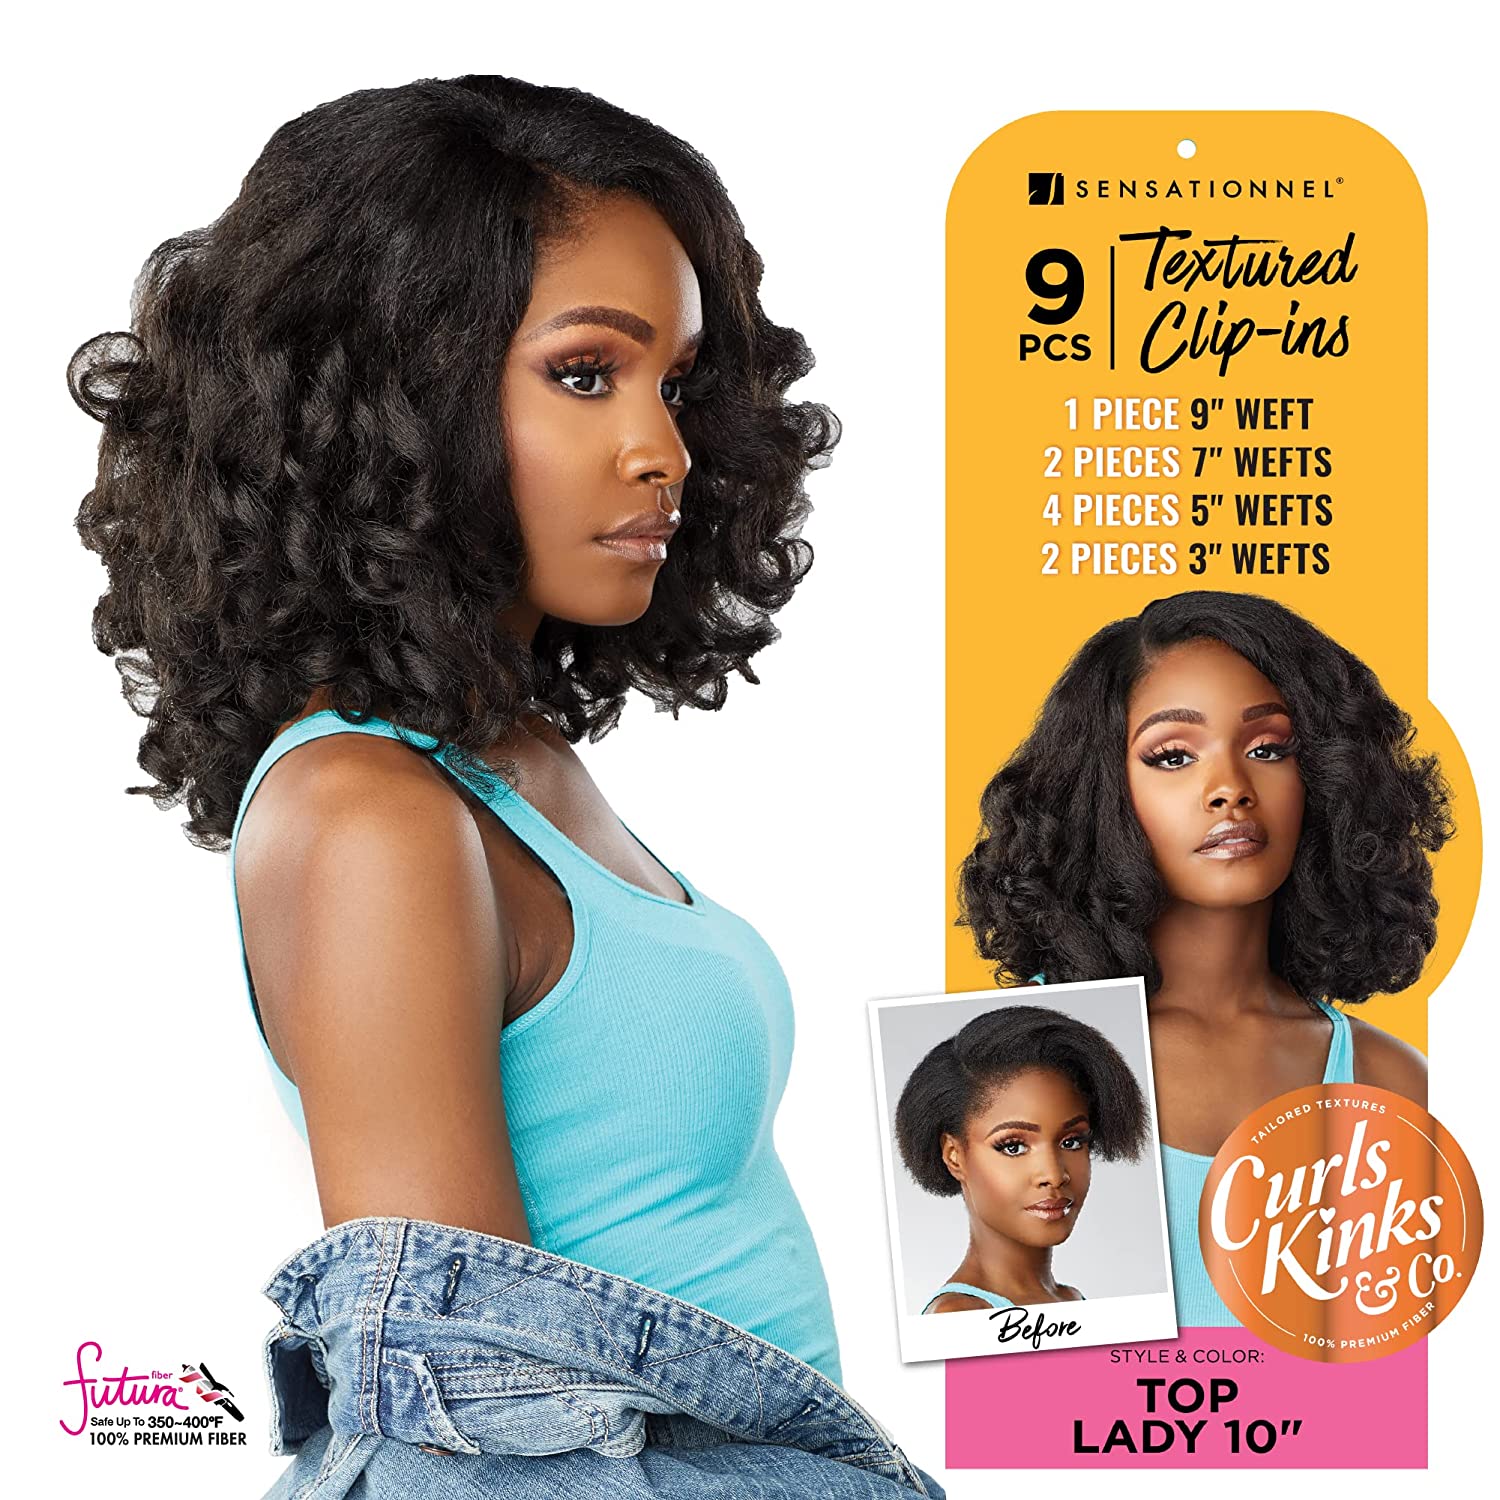 Sensationnel Clip in Top Lady - 10 inch Textured Clip in 9 Piece Pack adds Volume CK&CO Protective Style - Curls Kinks & Co (1B) Find Your New Look Today!